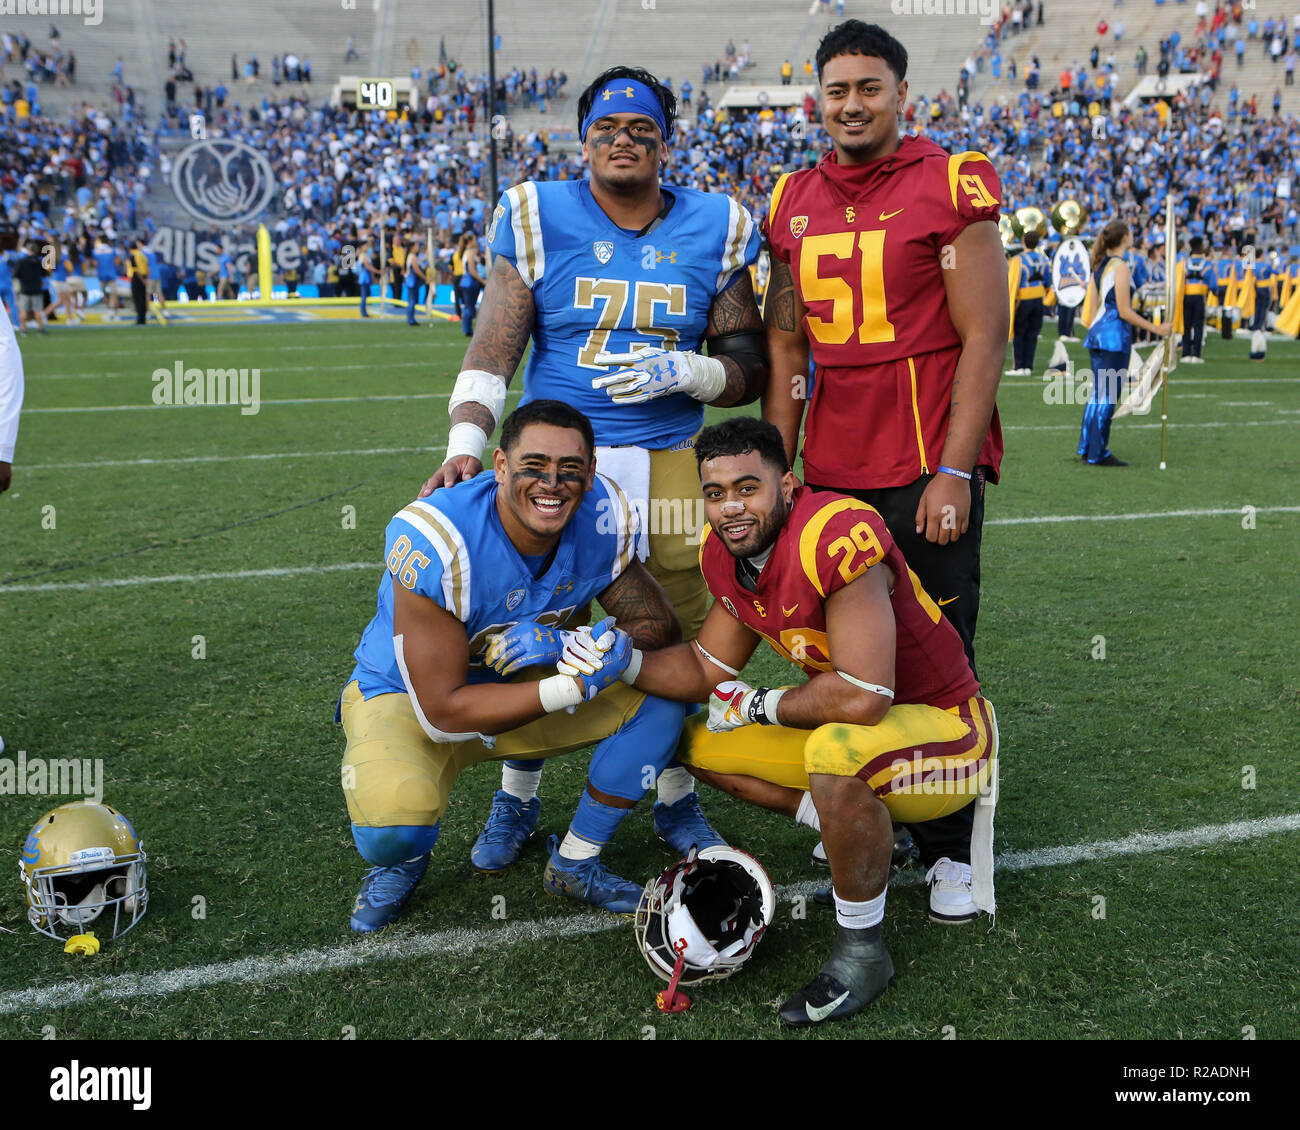 Pasadena CA. 17th Nov, 2018. UCLA Bruins tight end Devin Asiasi #86, offensive lineman Boss Tagaloa #75 and USC Trojans running back Vavae Malepeai #29, defensive lineman Marlon Tuipulotu #50 after the USC Trojans vs UCLA Bruins at the Rose Bowl in Pasadena, Ca. on November 17, 2018 (Photo by Jevone Moore) Credit: csm/Alamy Live News Stock Photo